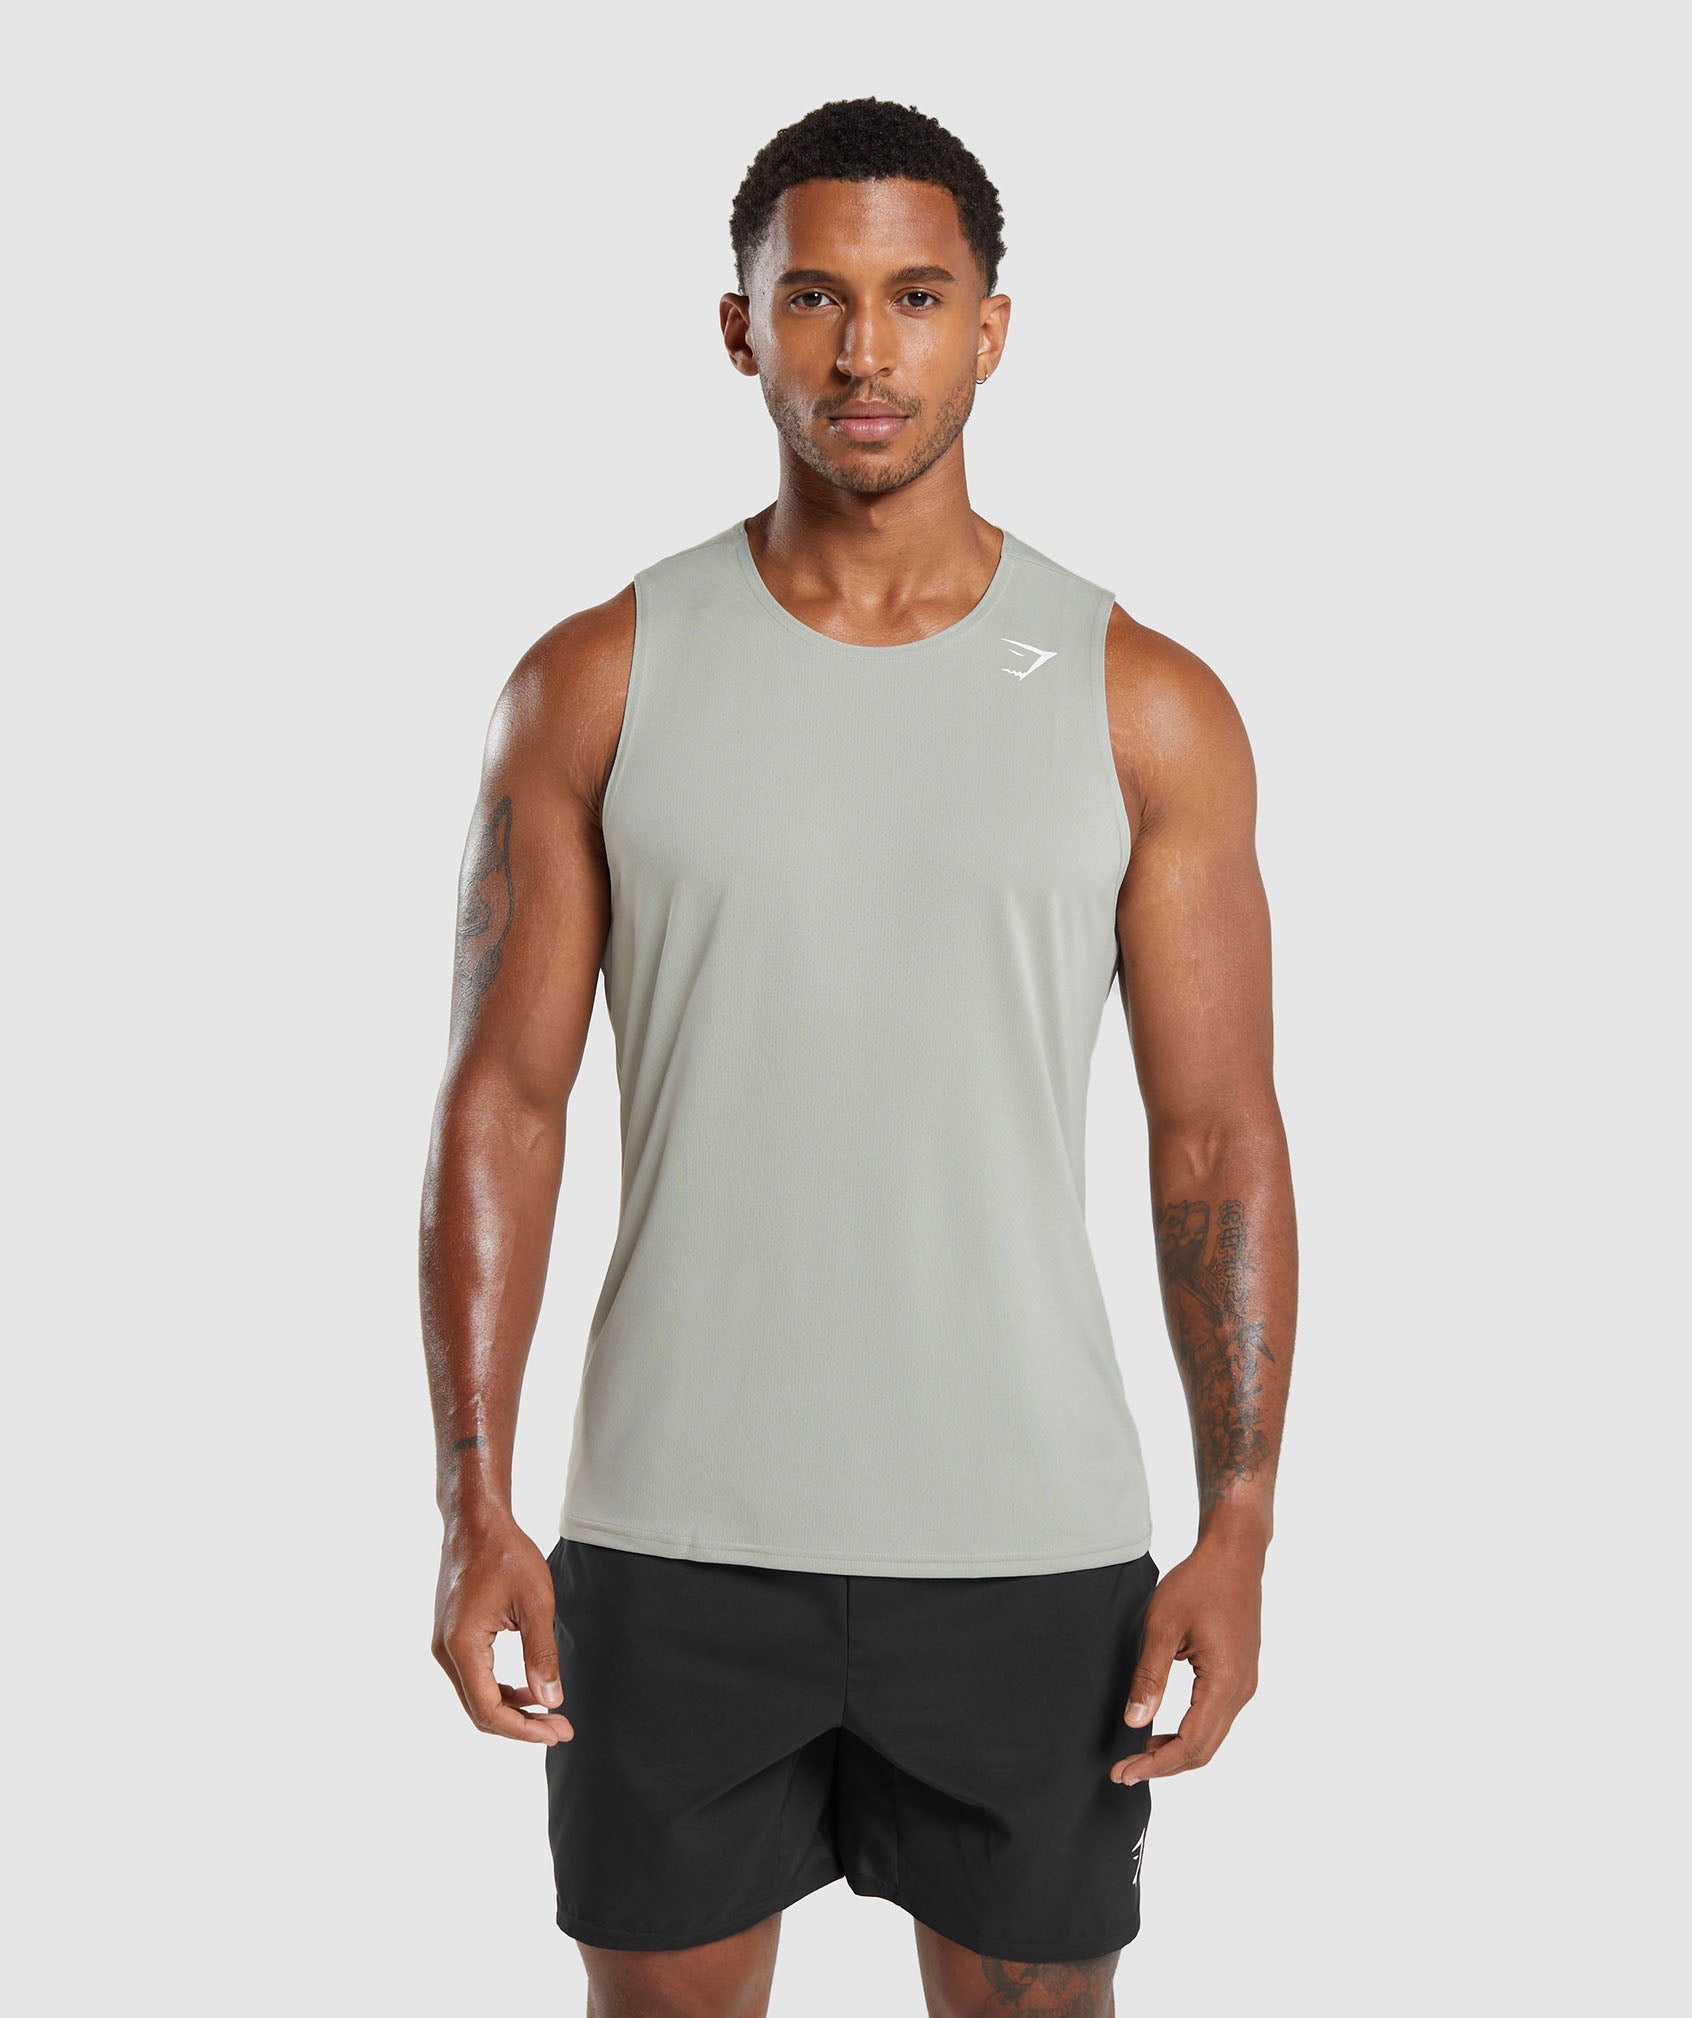 Arrival Tank in Stone Grey - view 1